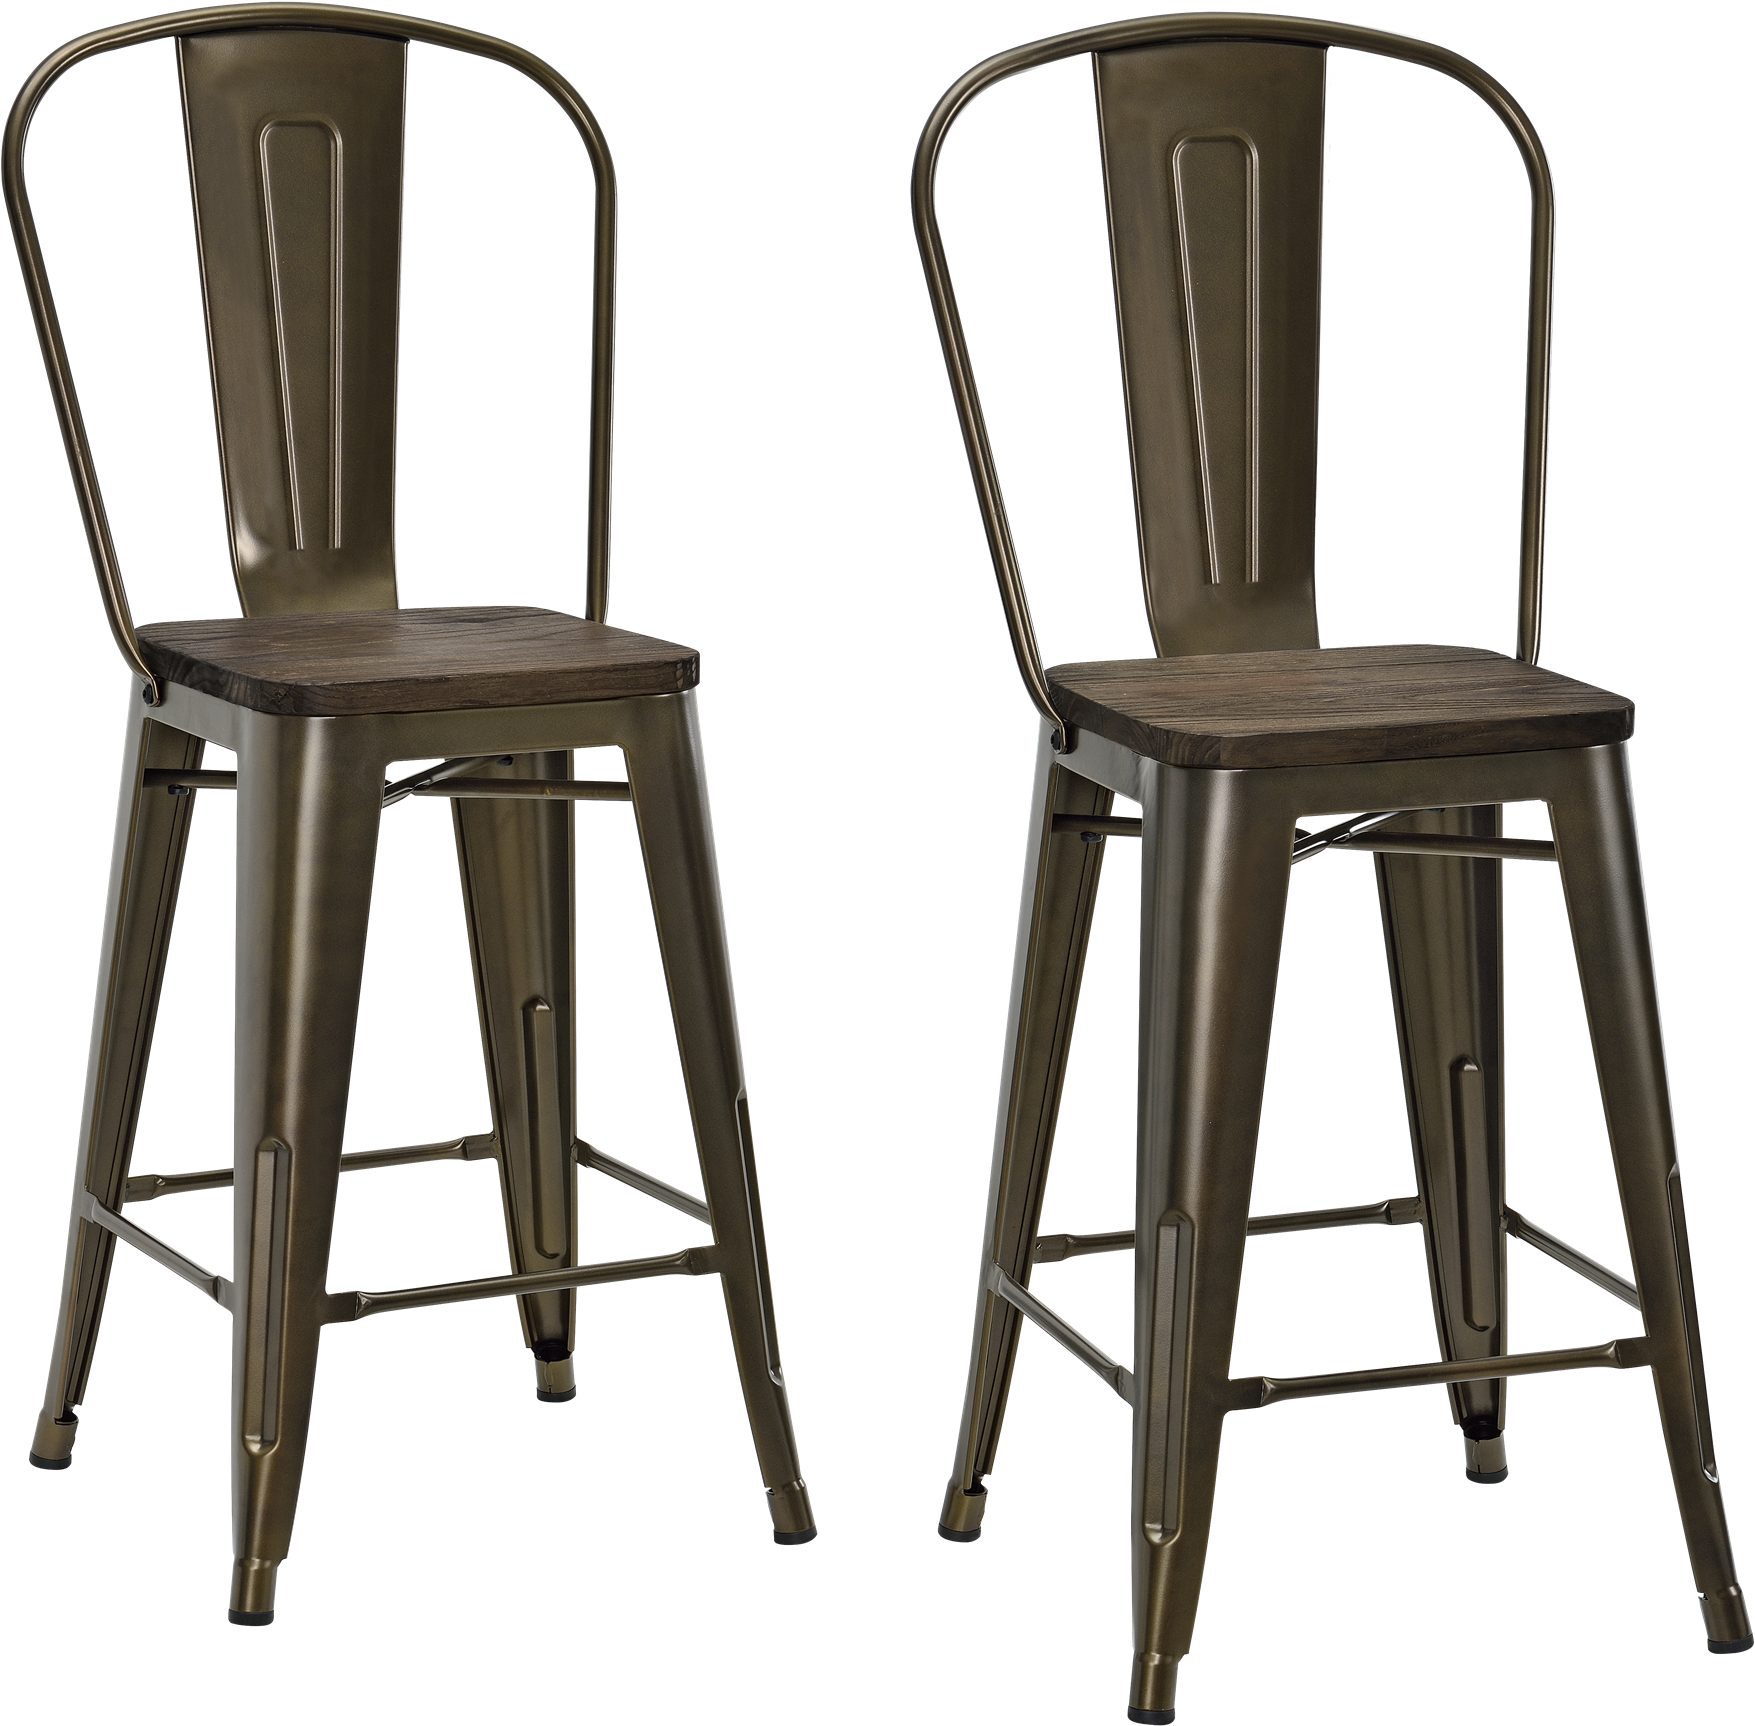 A Pair Of Metal Chairs